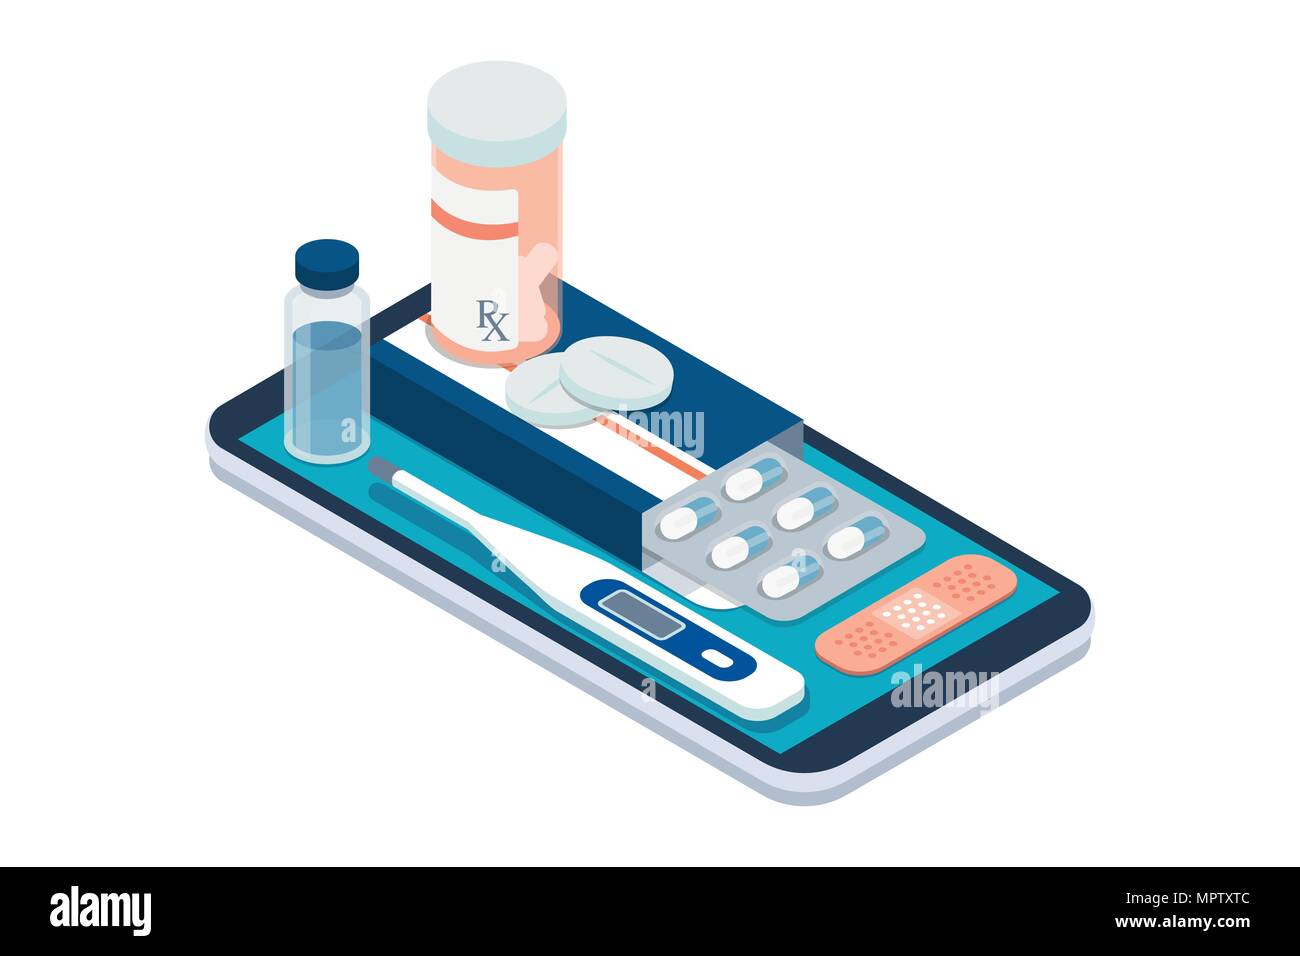 Medicine, healthcare and therapy app: prescription drugs, first aid and medical diagnosis equipment on a smartphone with icons Stock Vector